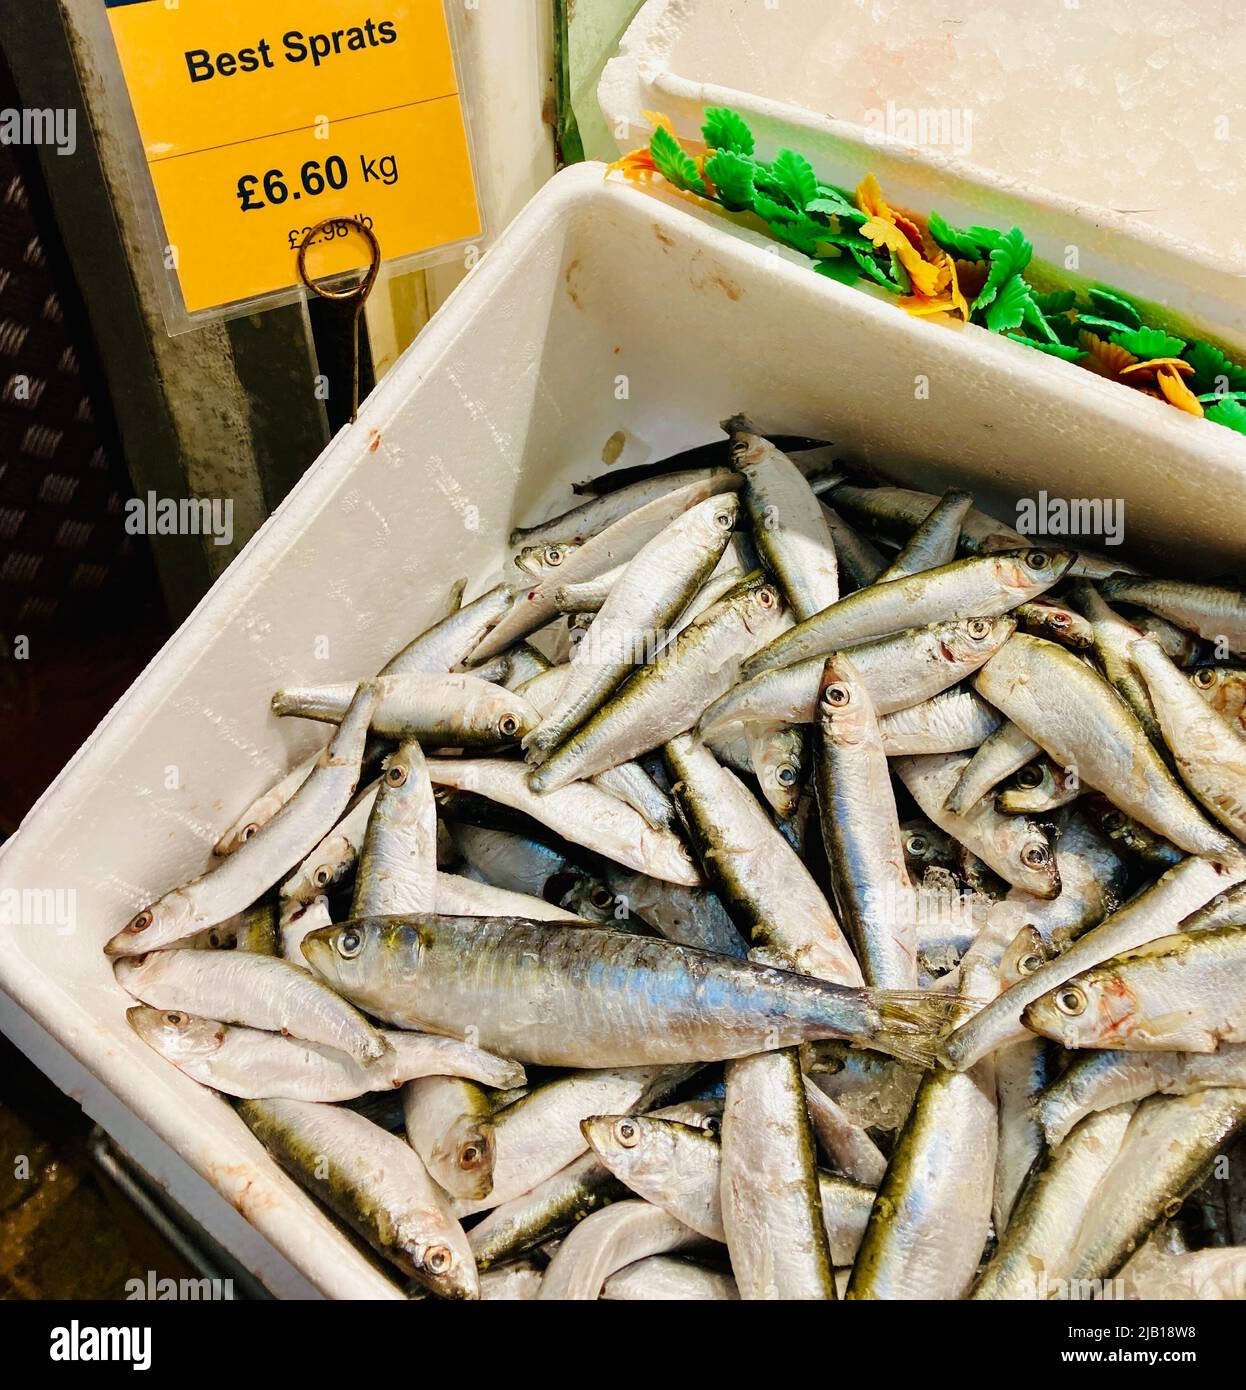 Fresh fish, sprats (Sprattus sprattus), for sale at a fishmongers counter in a fish market in Leeds. Stock Photo